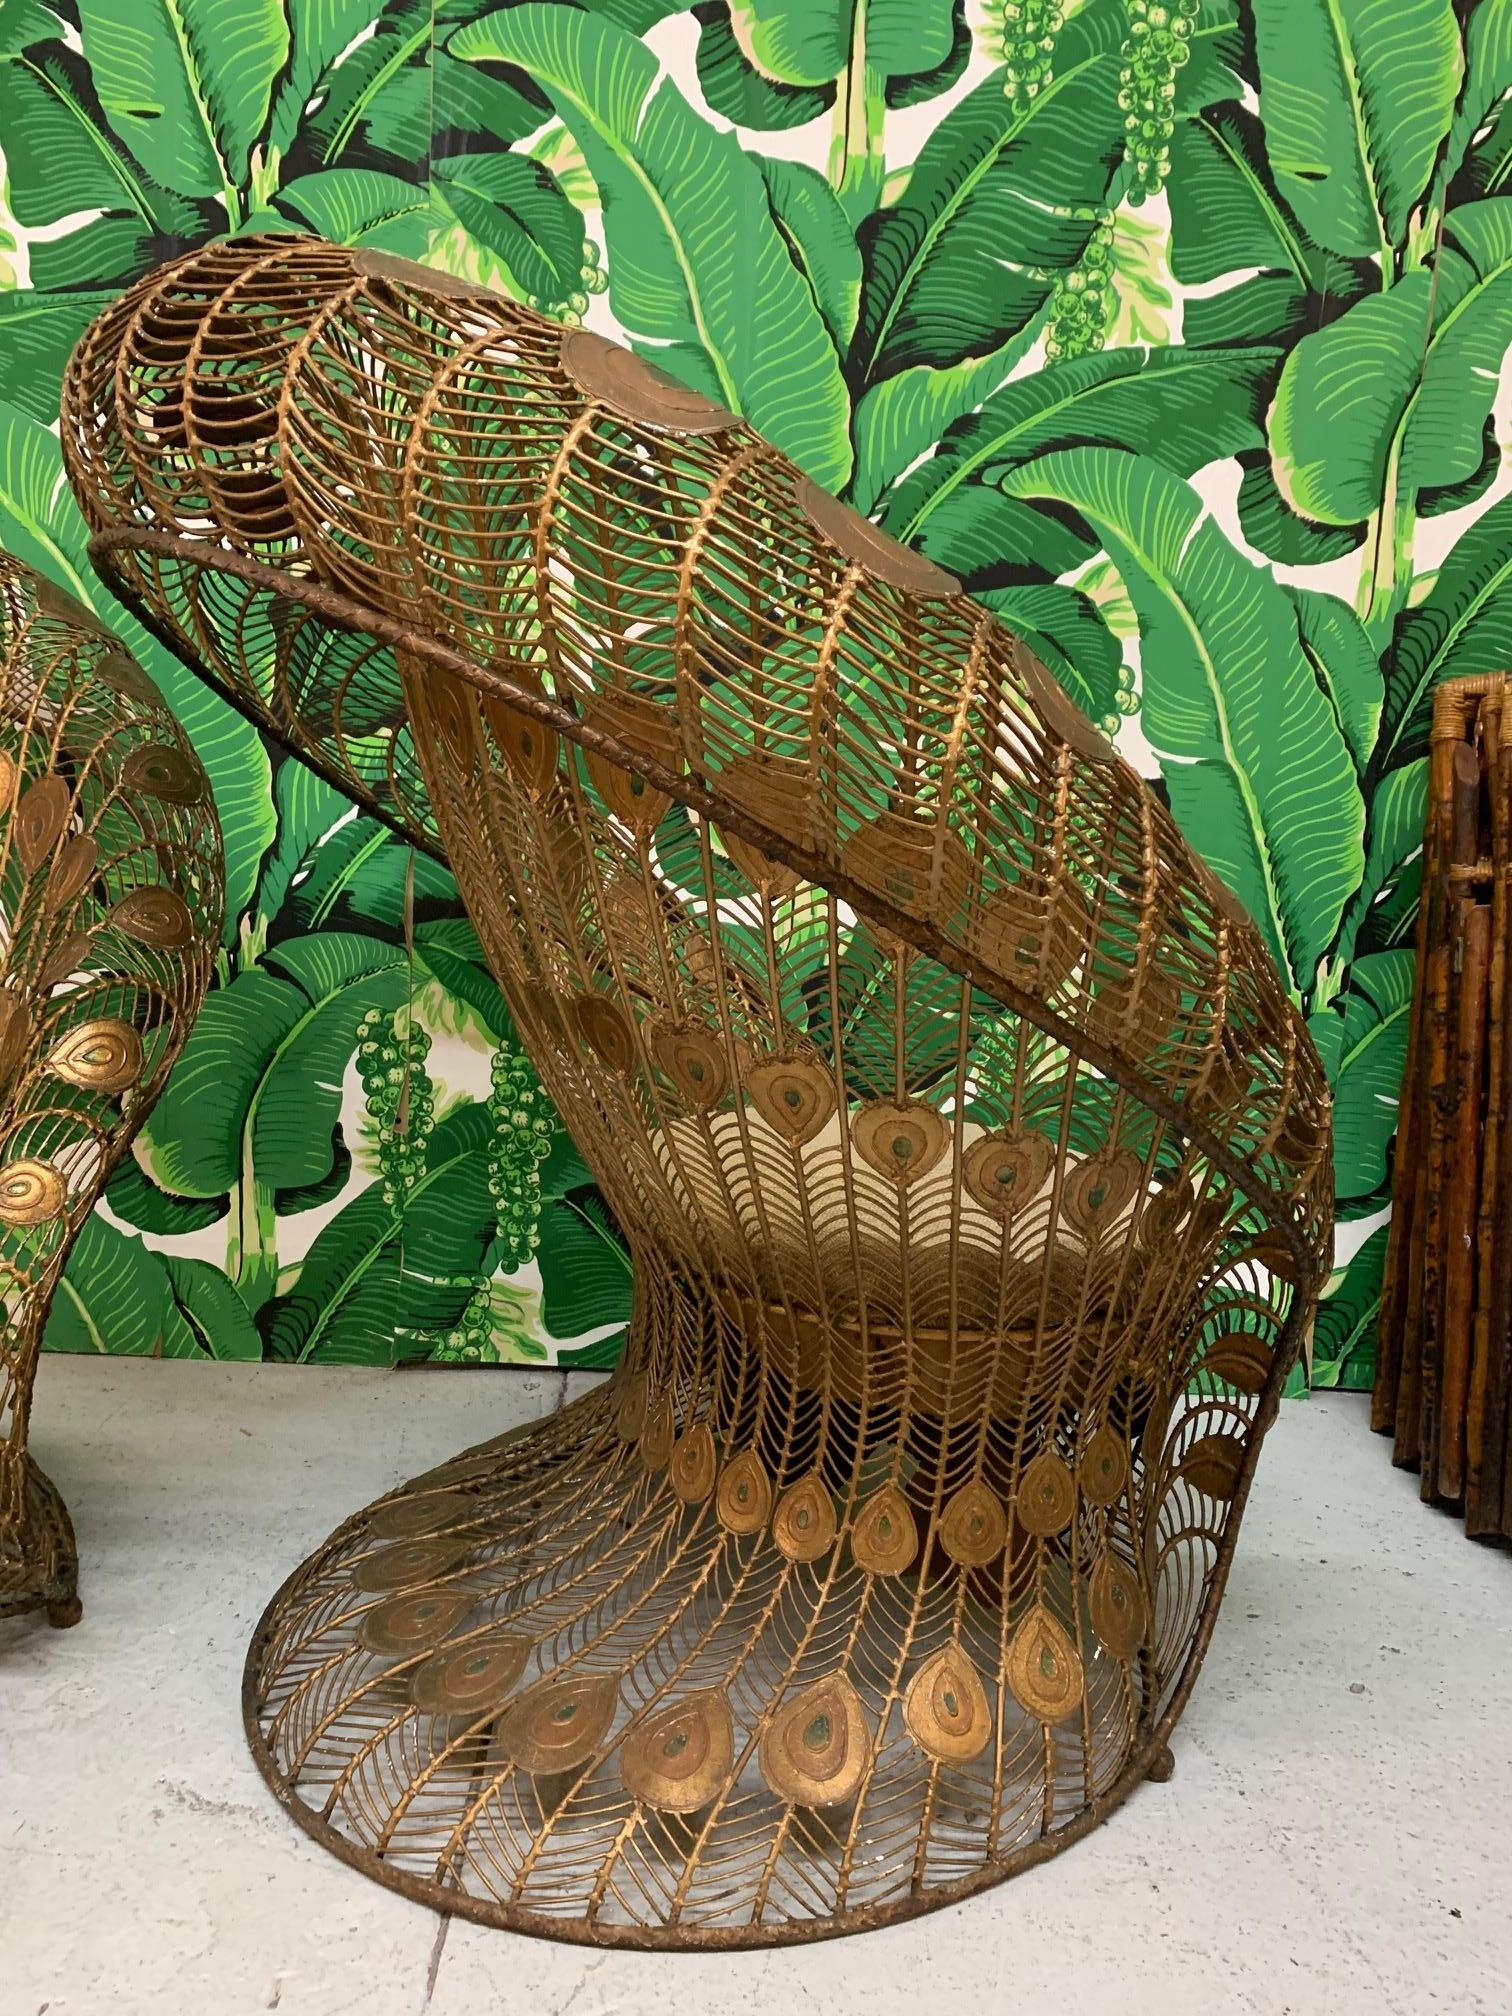 Pair of vintage steel club chairs feature sculptural form mimicking both a peacock's collapsed tail feather train as well as the feathers erect and on display. Very heavy and well constructed, frames are welded from wrought iron and include